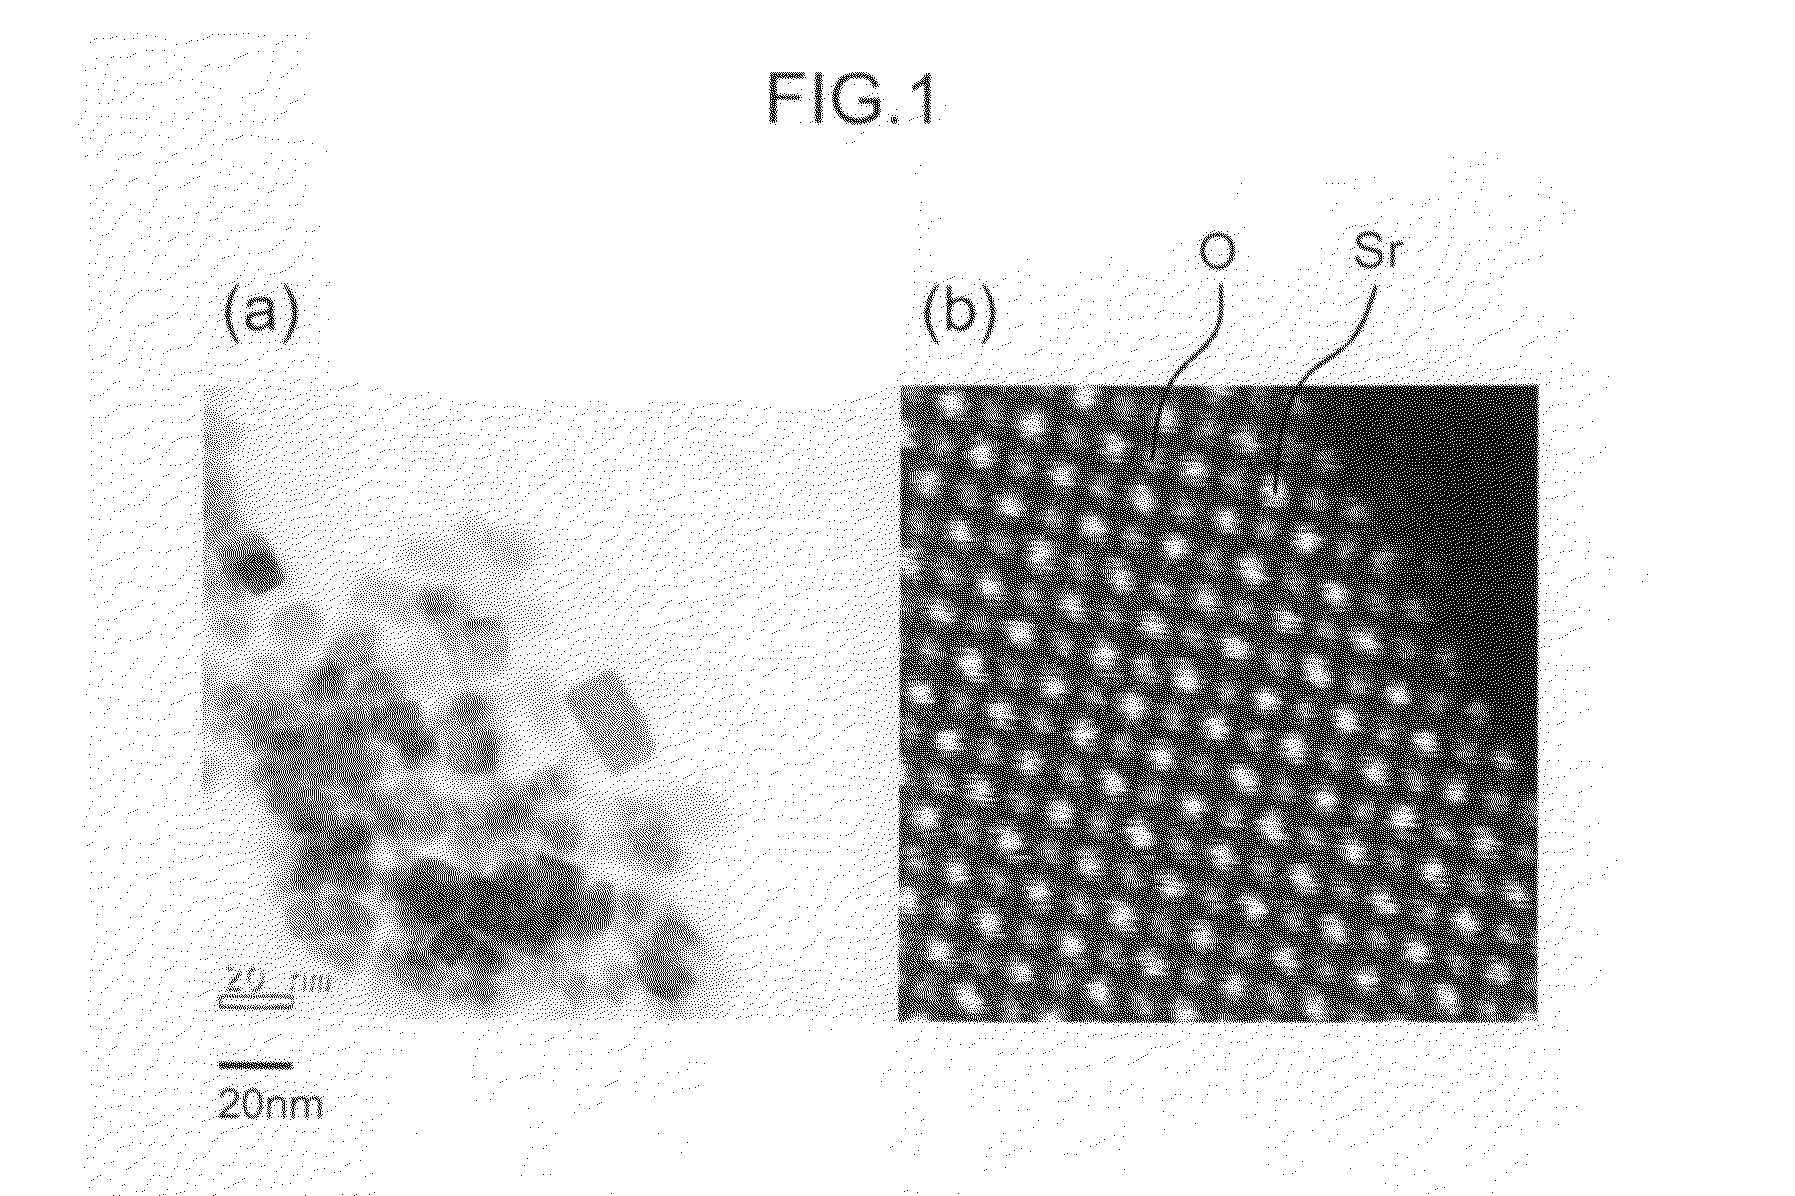 METHOD OF PRODUCING FILM OF SURFACE Nb-CONTAINING La-STO CUBIC CRYSTAL PARTICLES